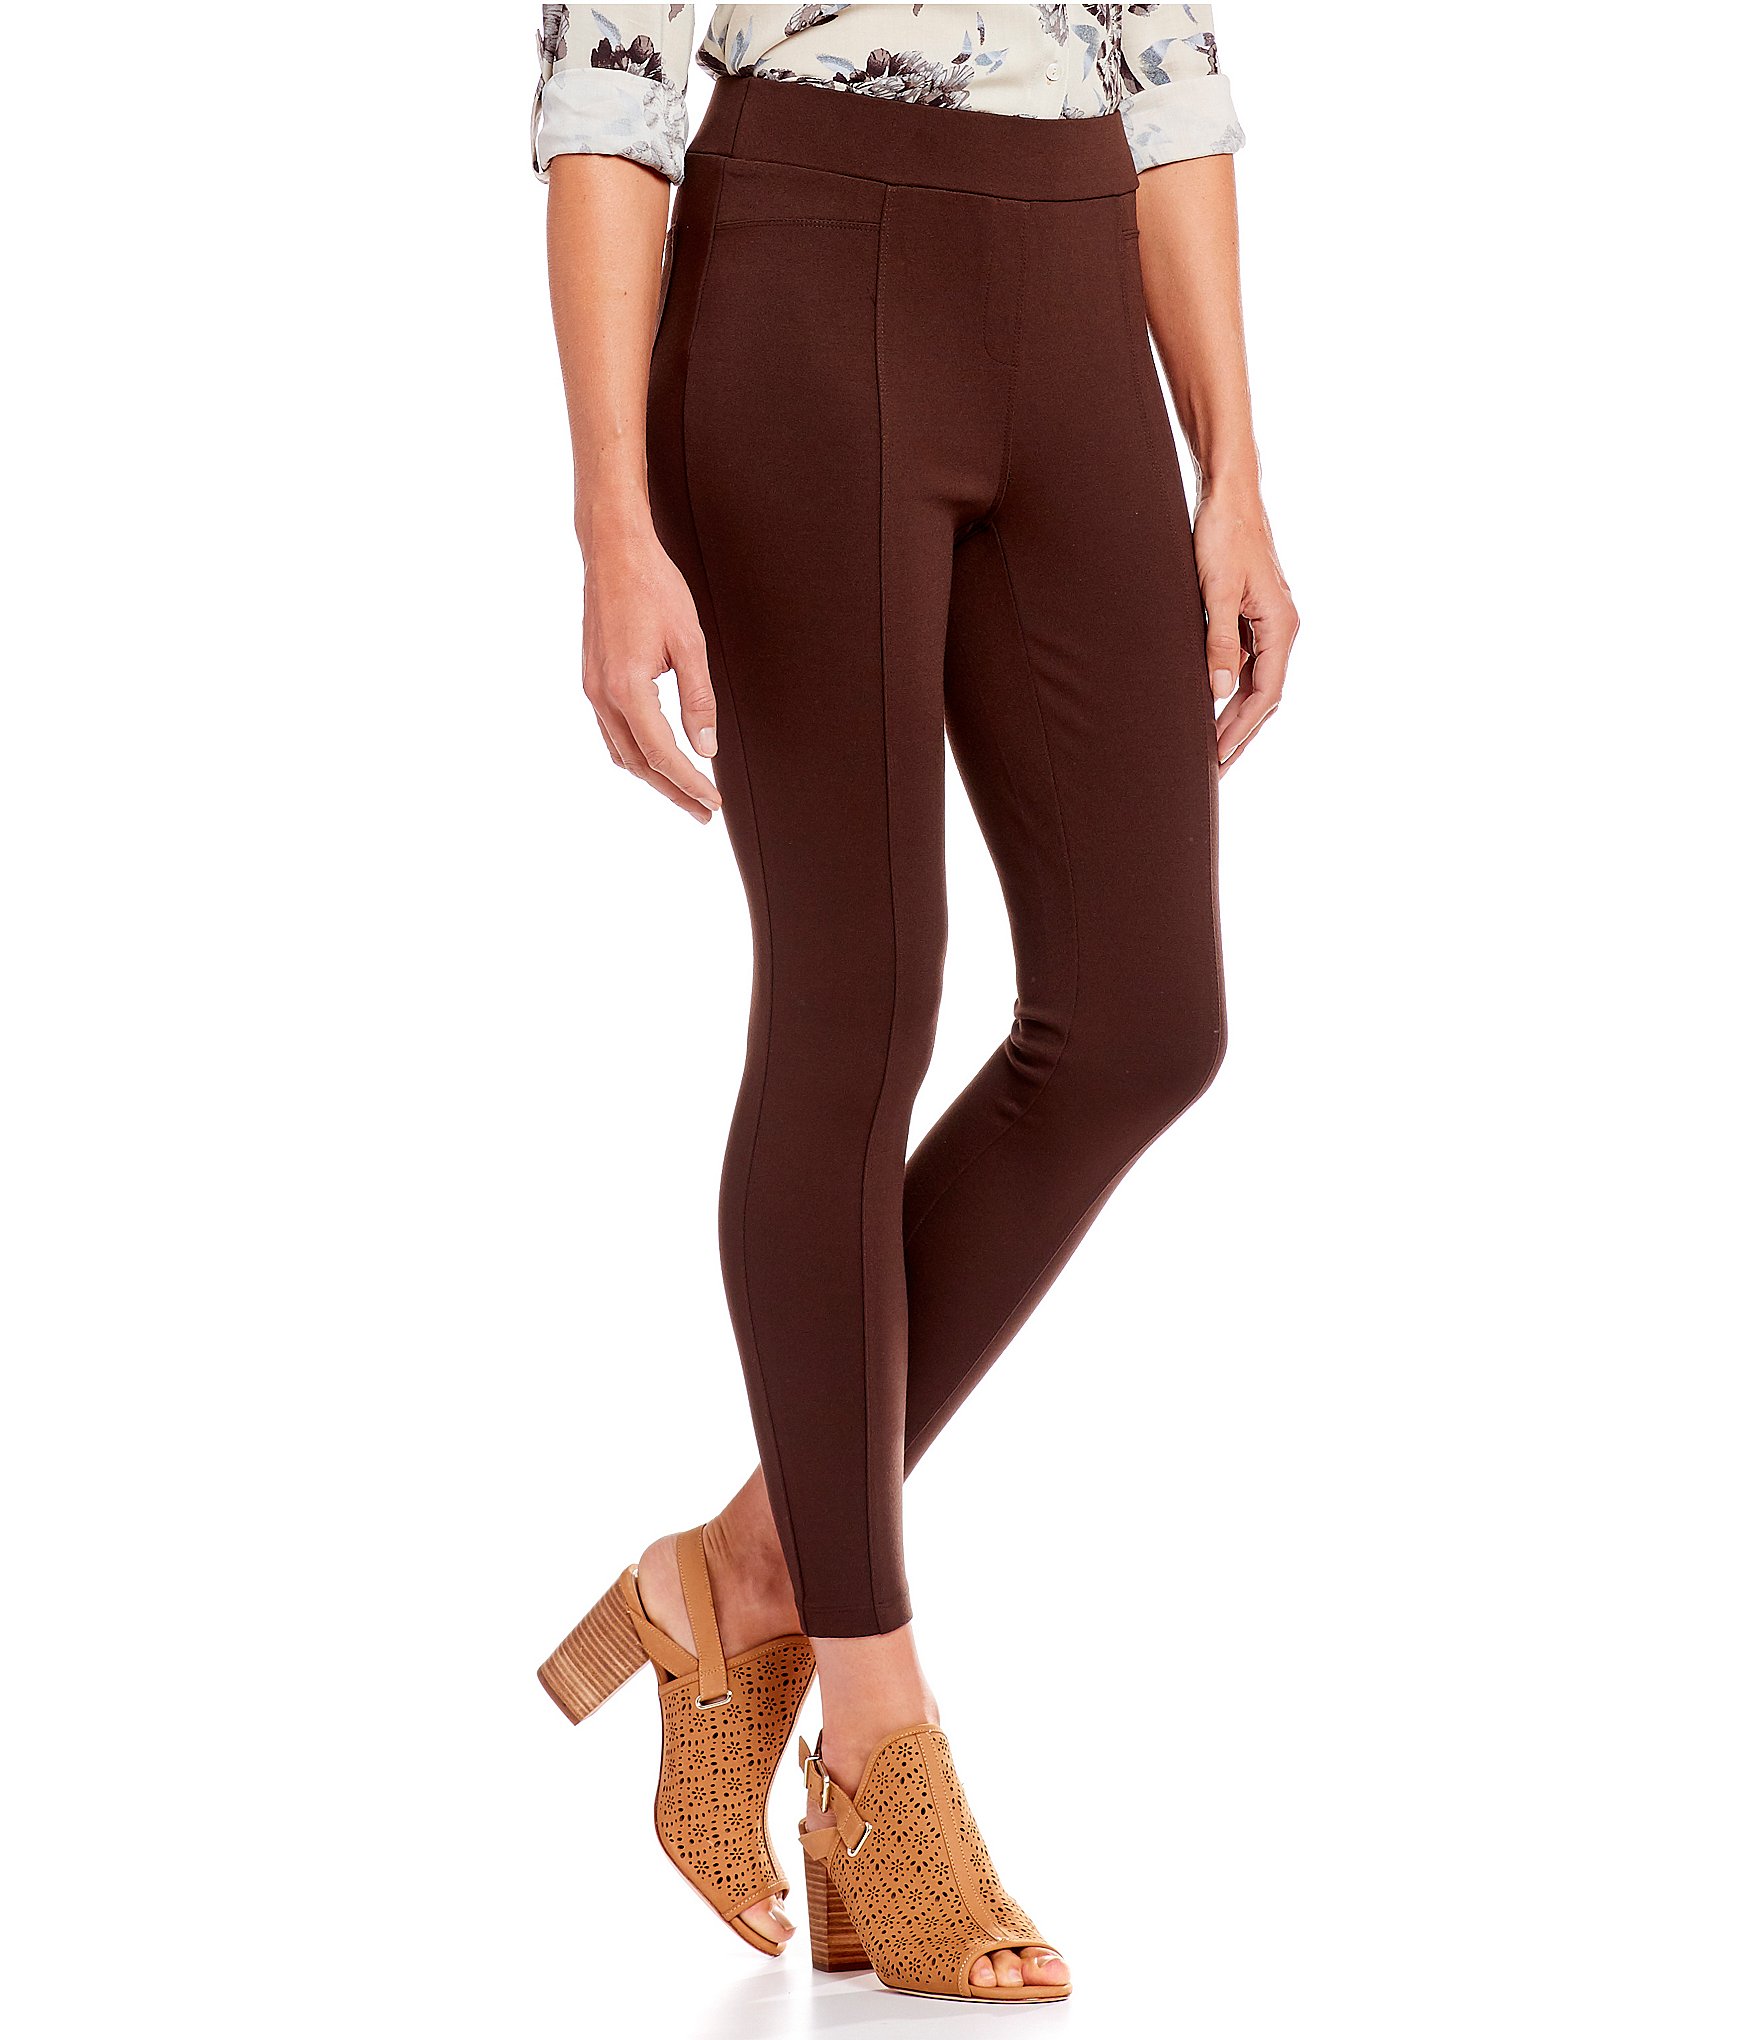 Intro Petite Size Bella Solid Double Knit Slim Her Leggings